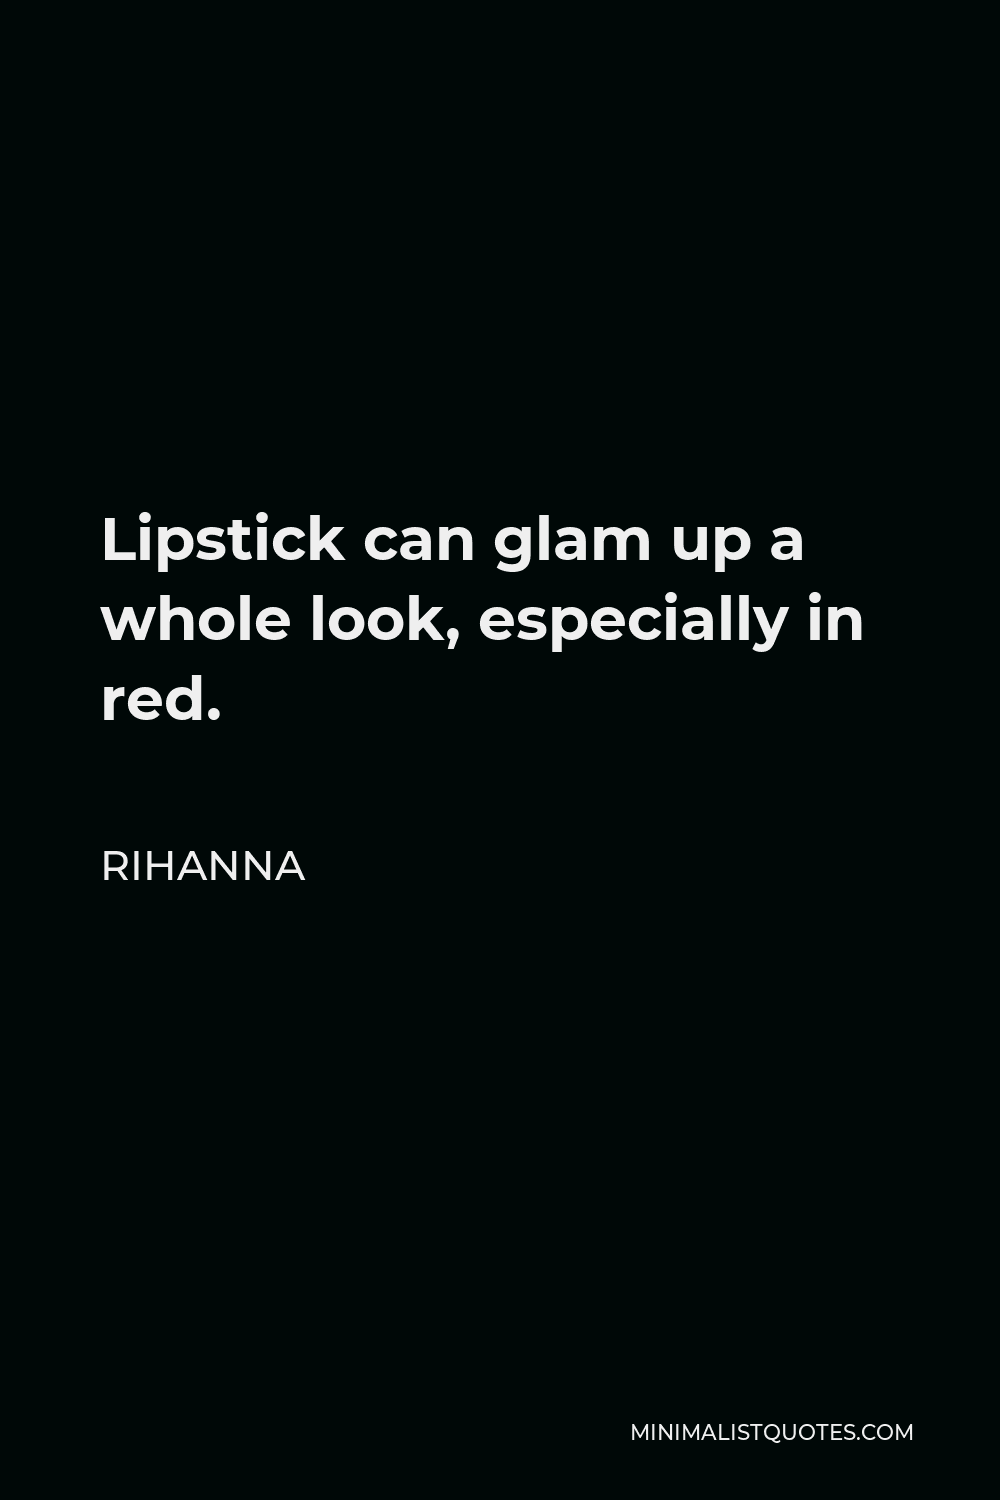 Rihanna Quote: Lipstick glam up a whole look, especially in red.